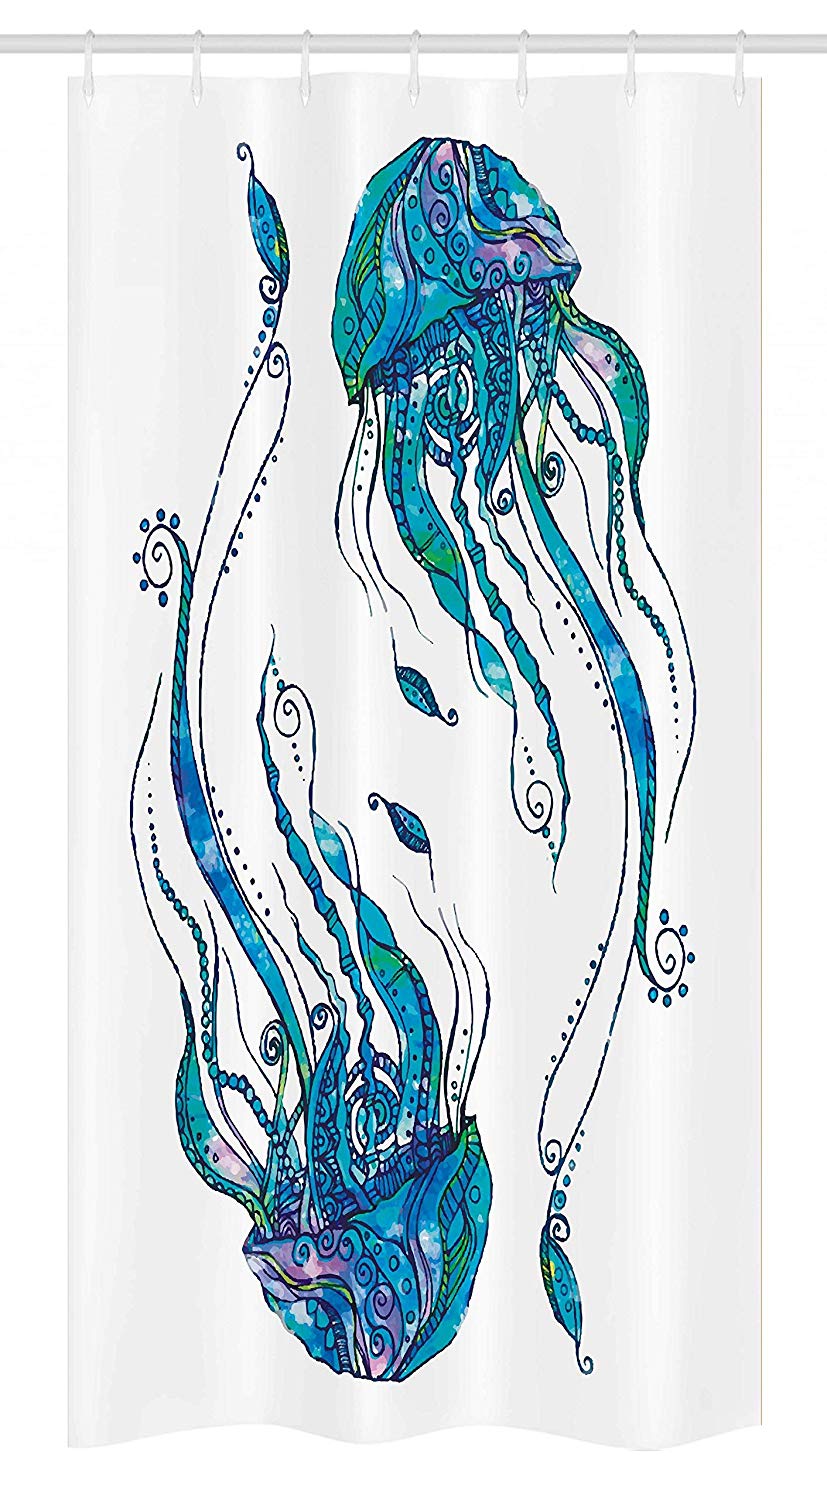 Ambesonne Jellyfish Decor Stall Shower Curtain, Jellyfish Shaped with Ornamental Patterns Boho Style Beach Themed Aqua Art, Fabric Bathroom Decor Set with Hooks, 36 W x 72 L inches, Turquoise